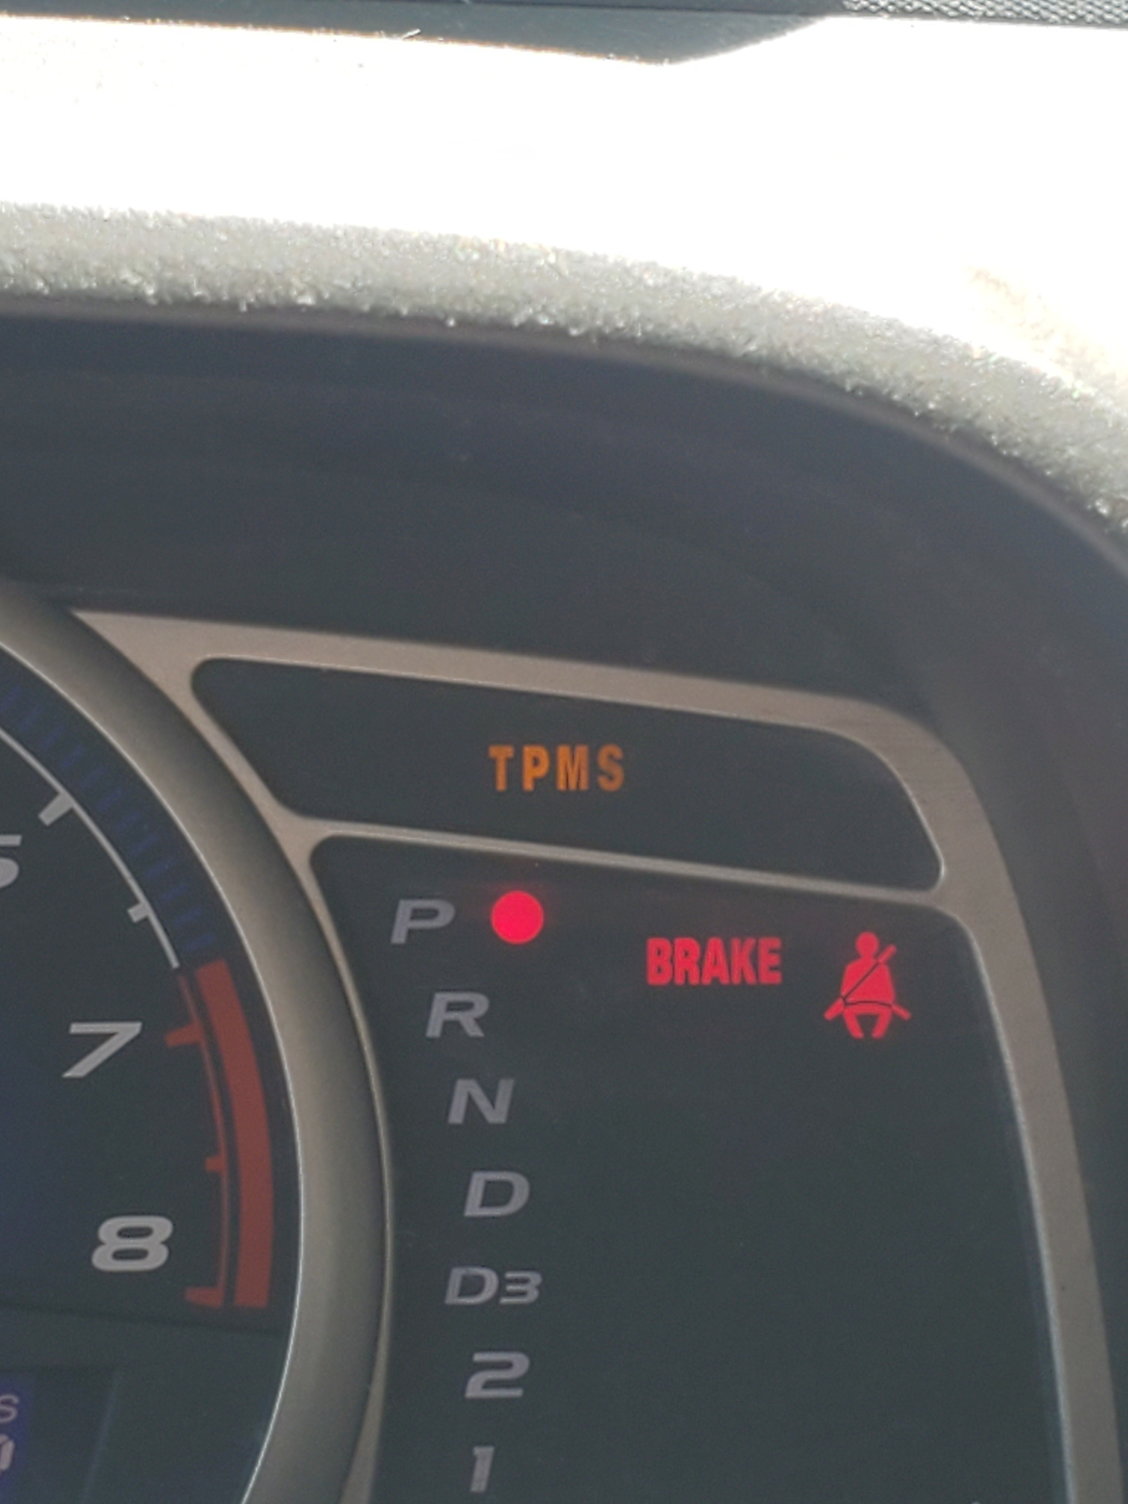 My TPMS Light Came On, What Do I Do?